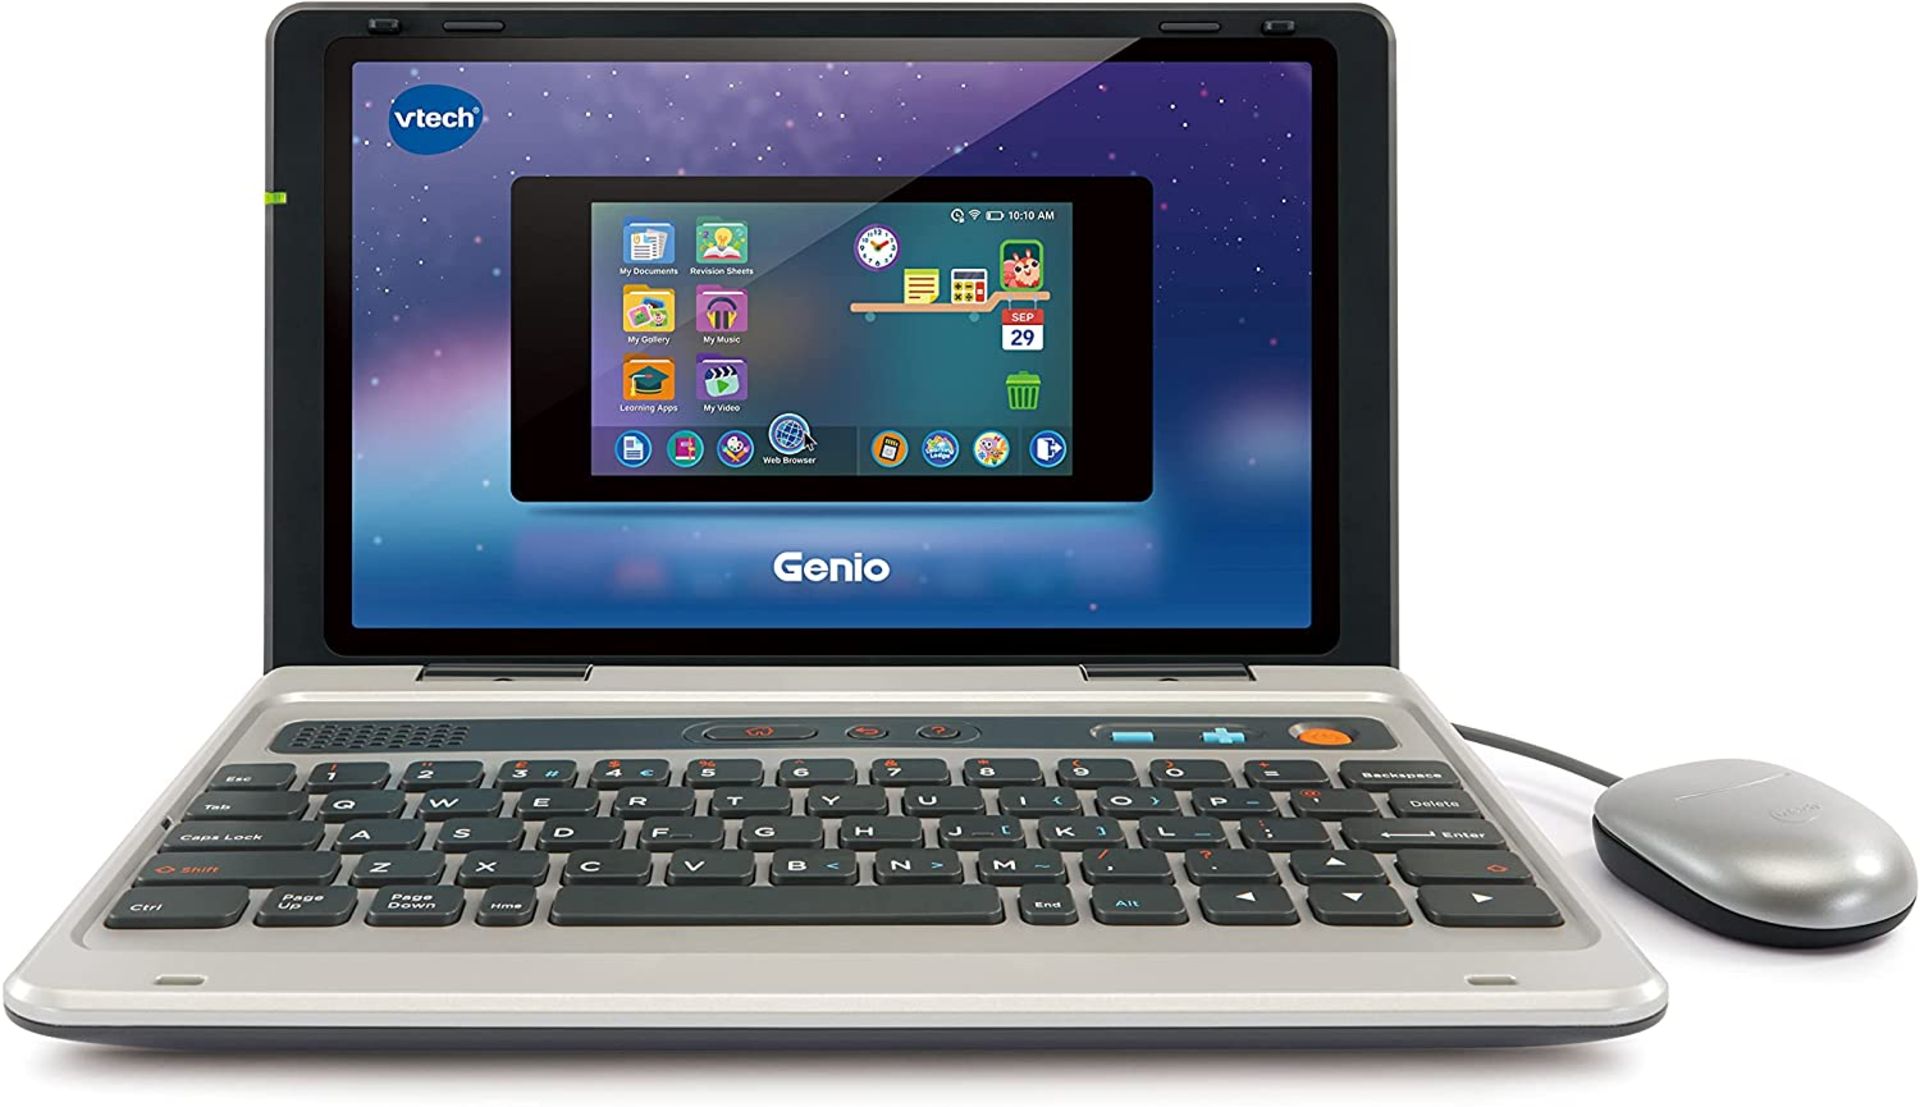 RRP - £89.99 VTech Genio My First Laptop, Silver, Educational Laptop for Kids with 80+ Activities an